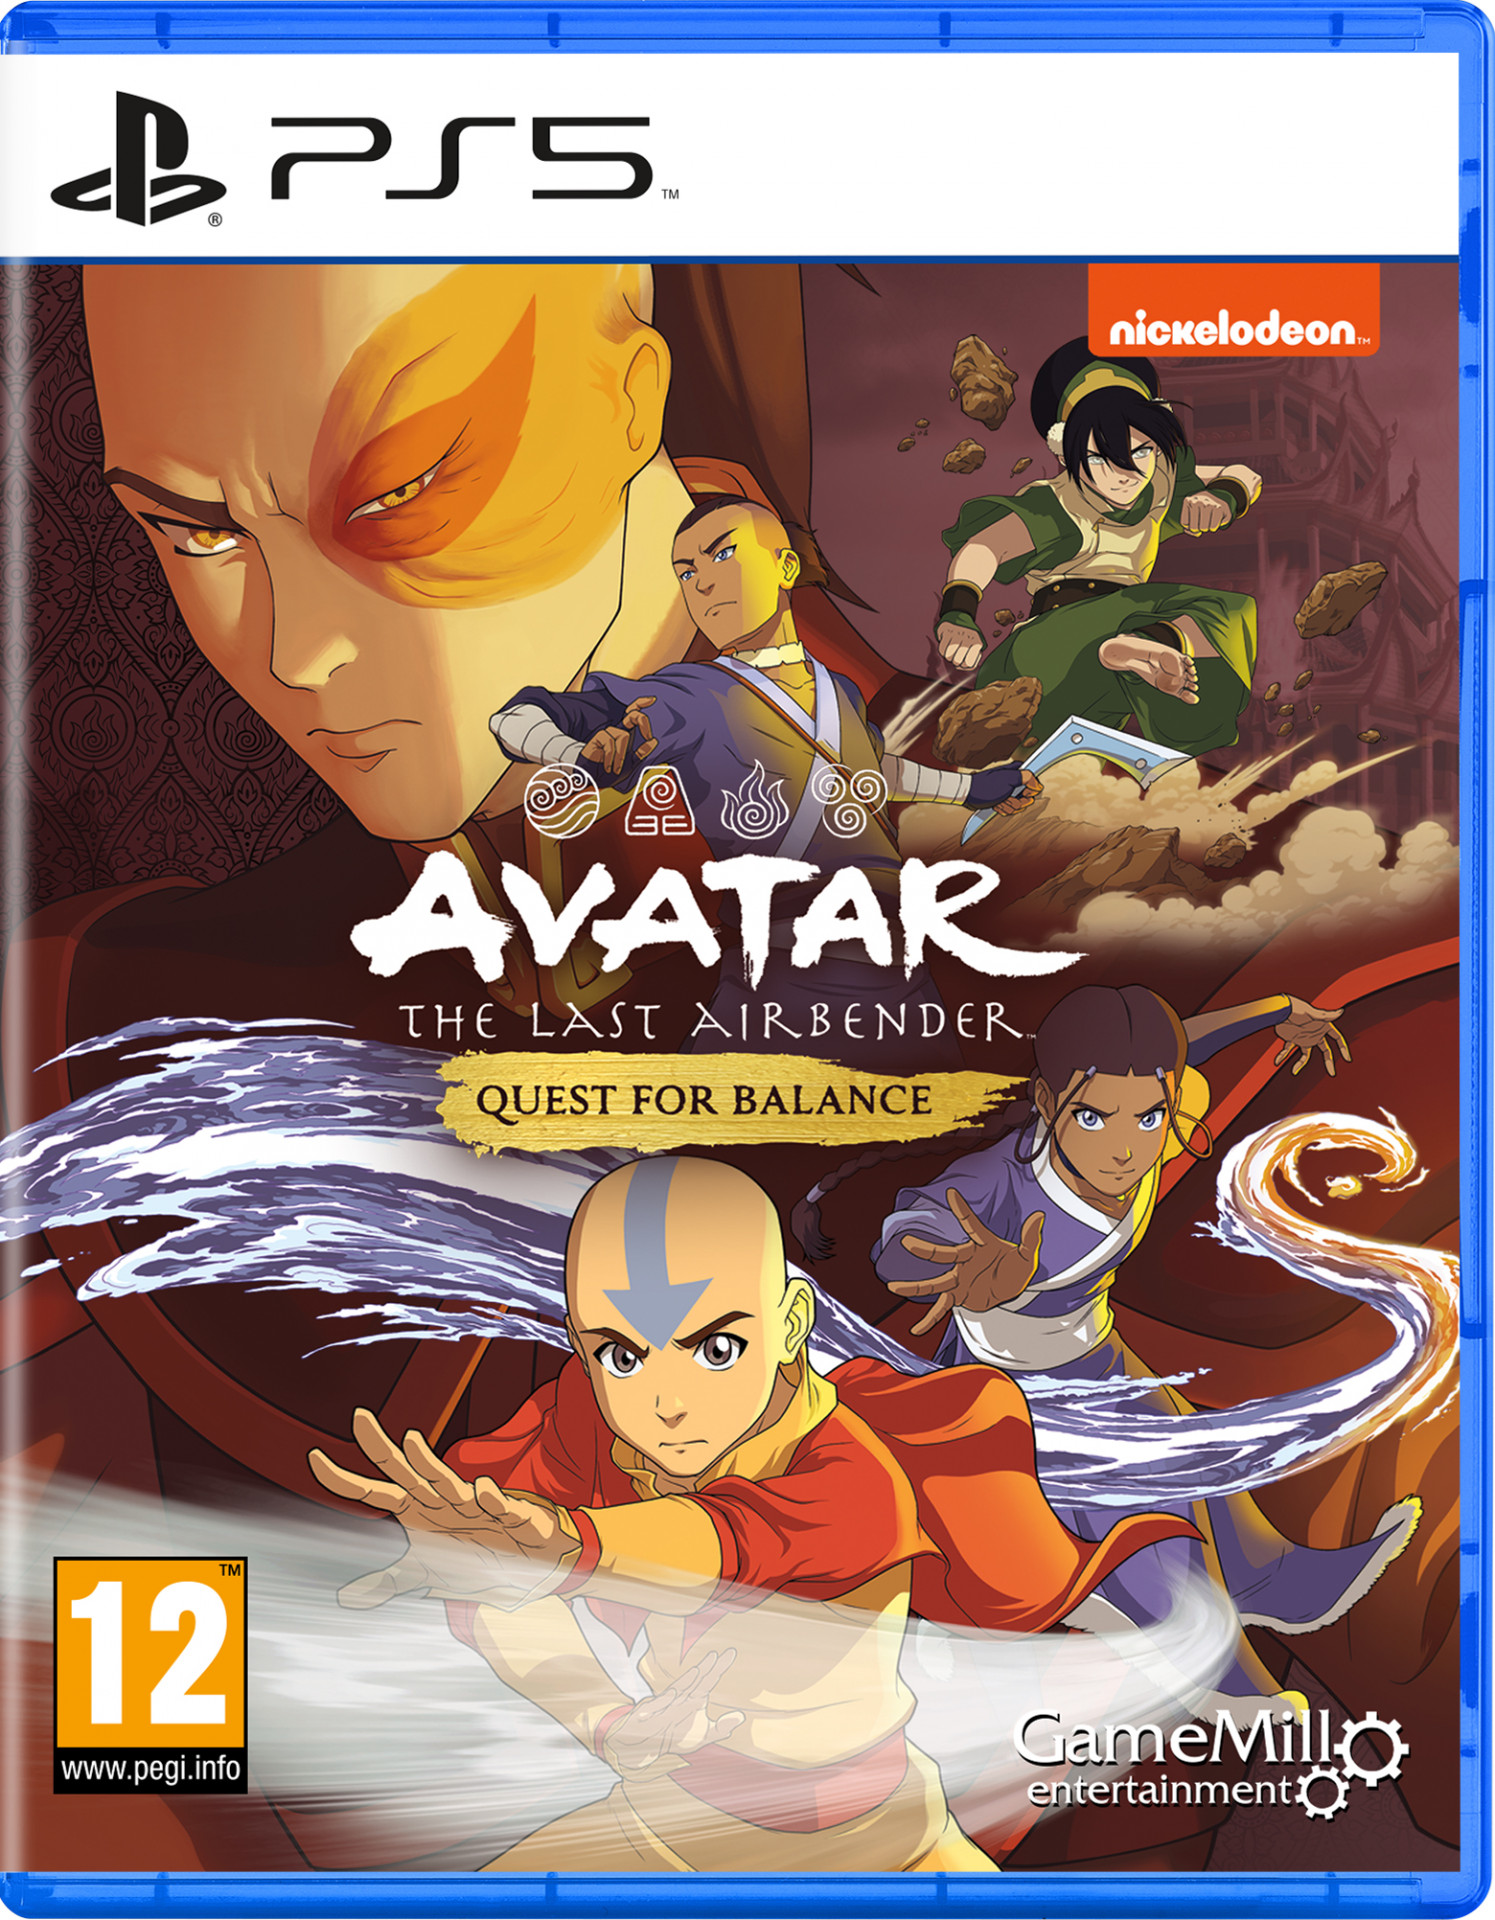 Avatar The Last Airbender: Quest for Balance (PS5), GameMill Entertainment